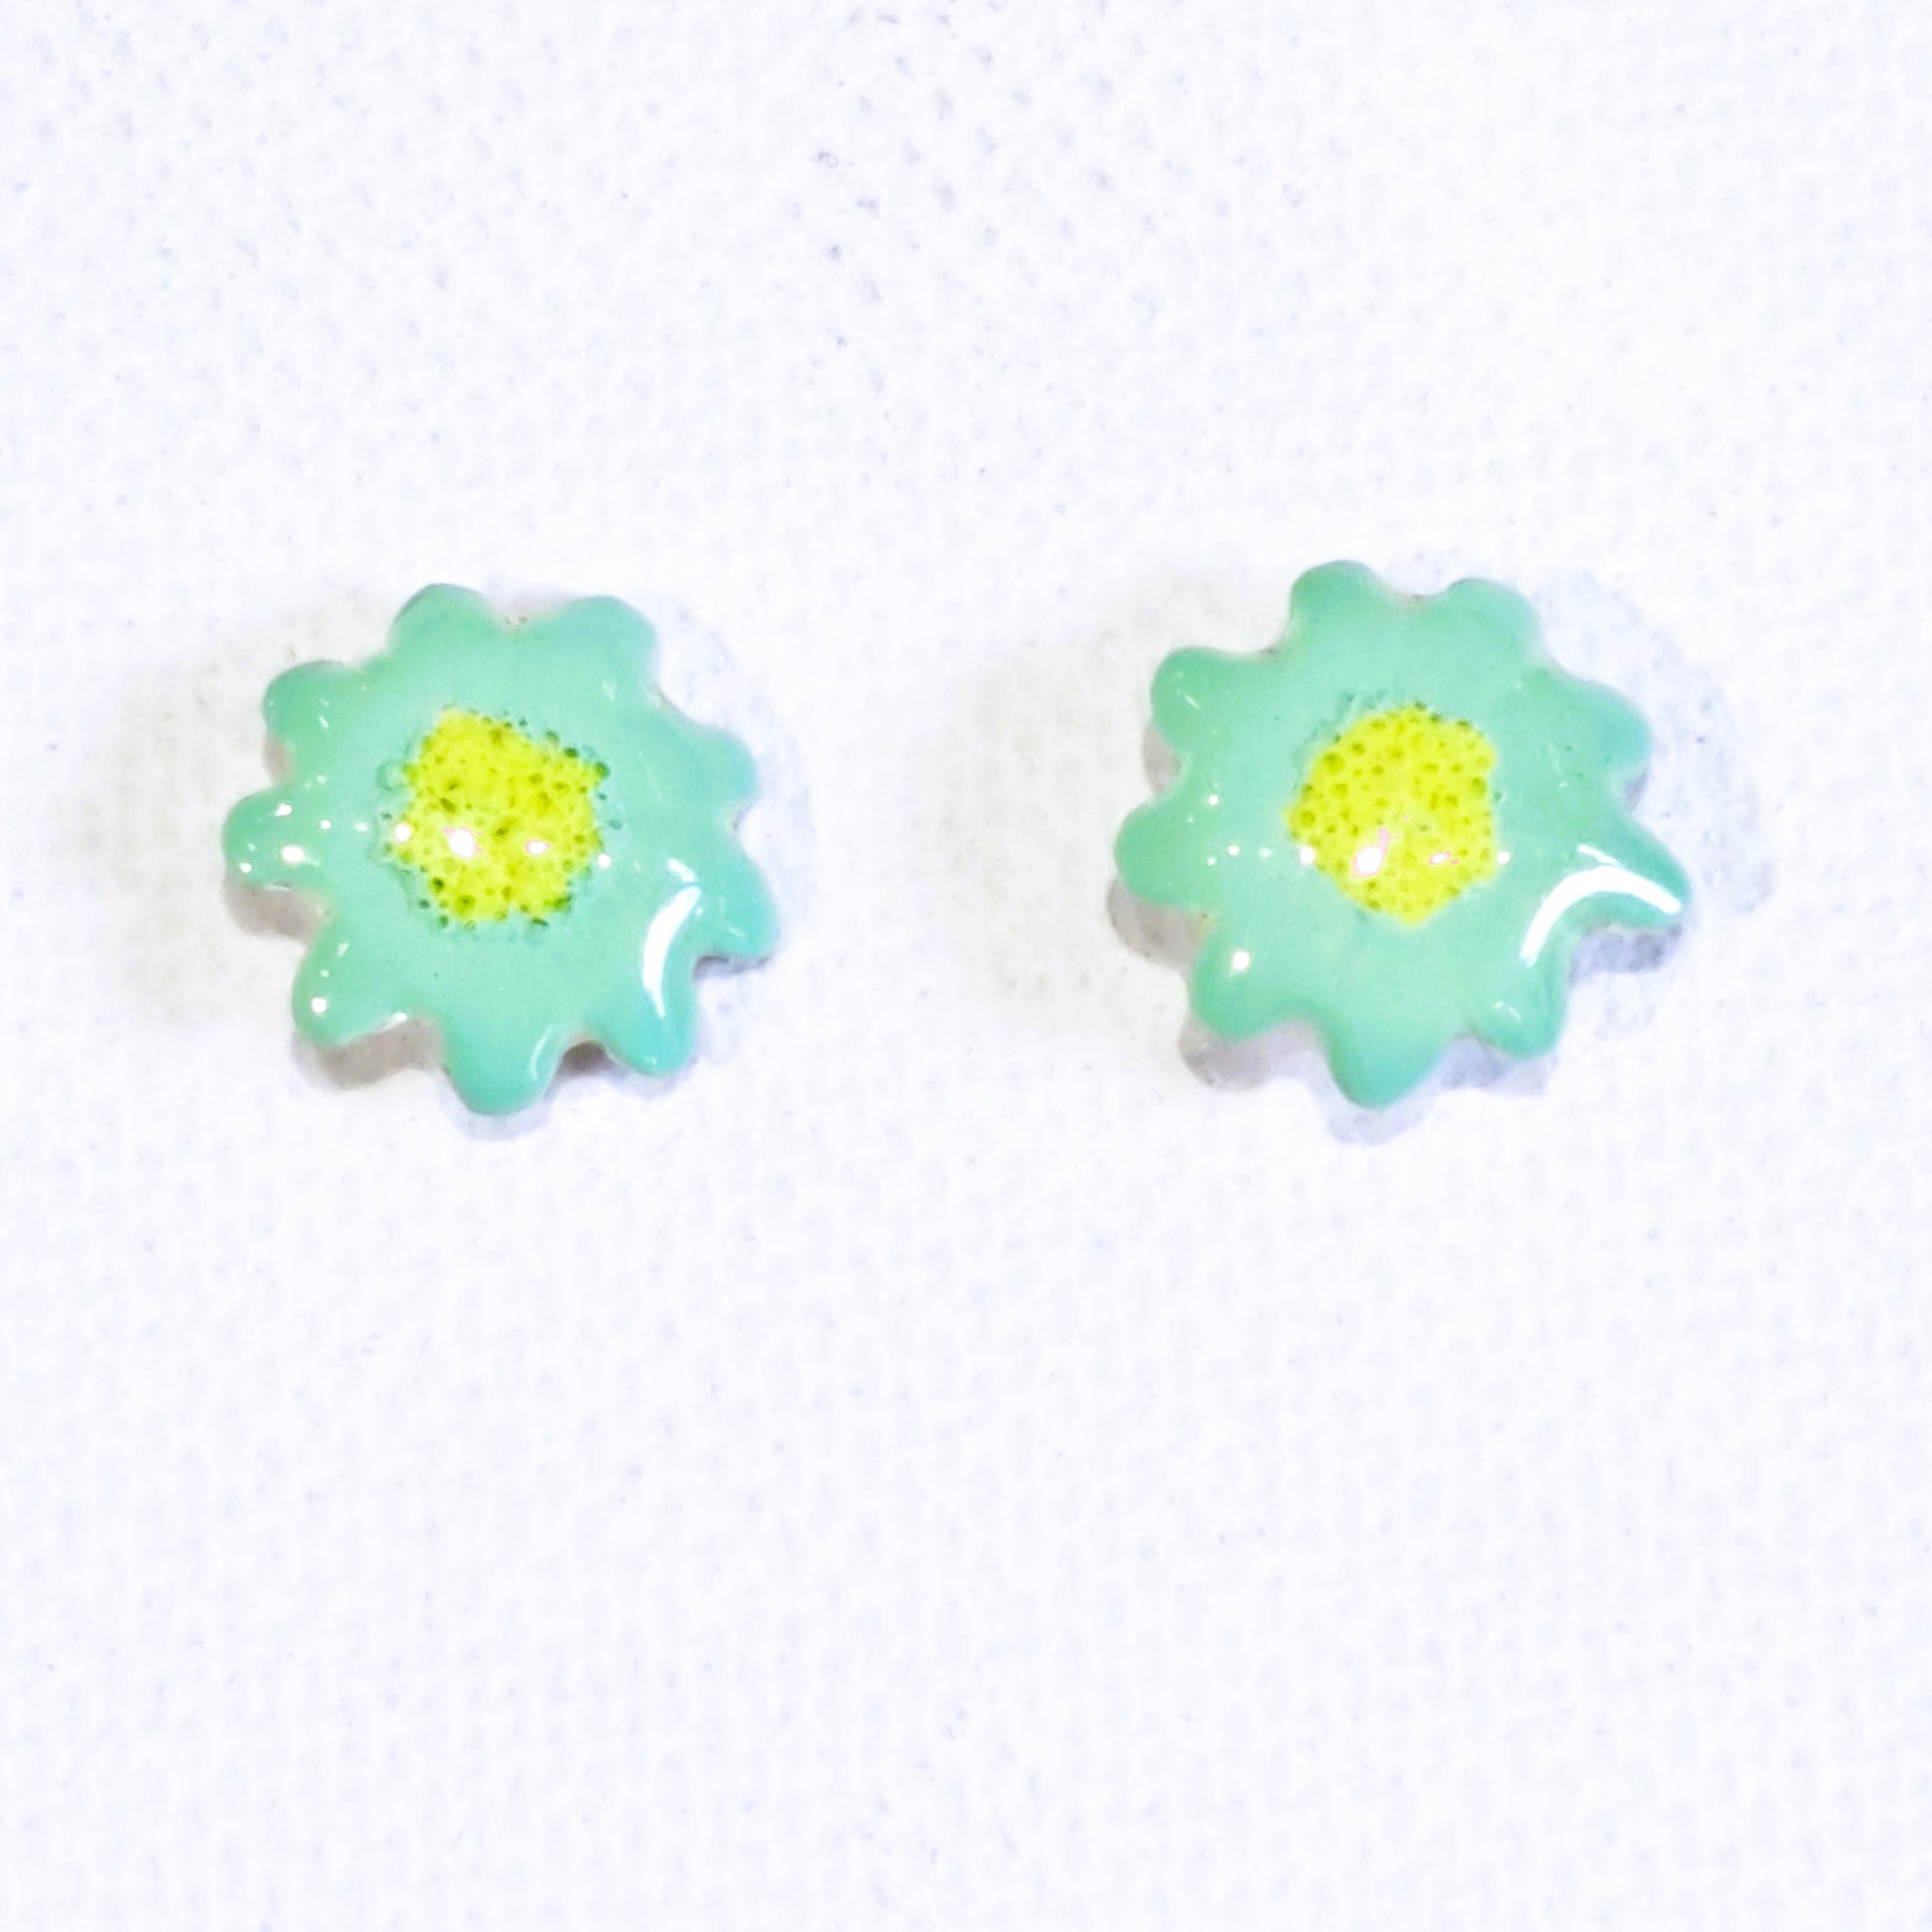 Light green silver stud earrings with yellow center .